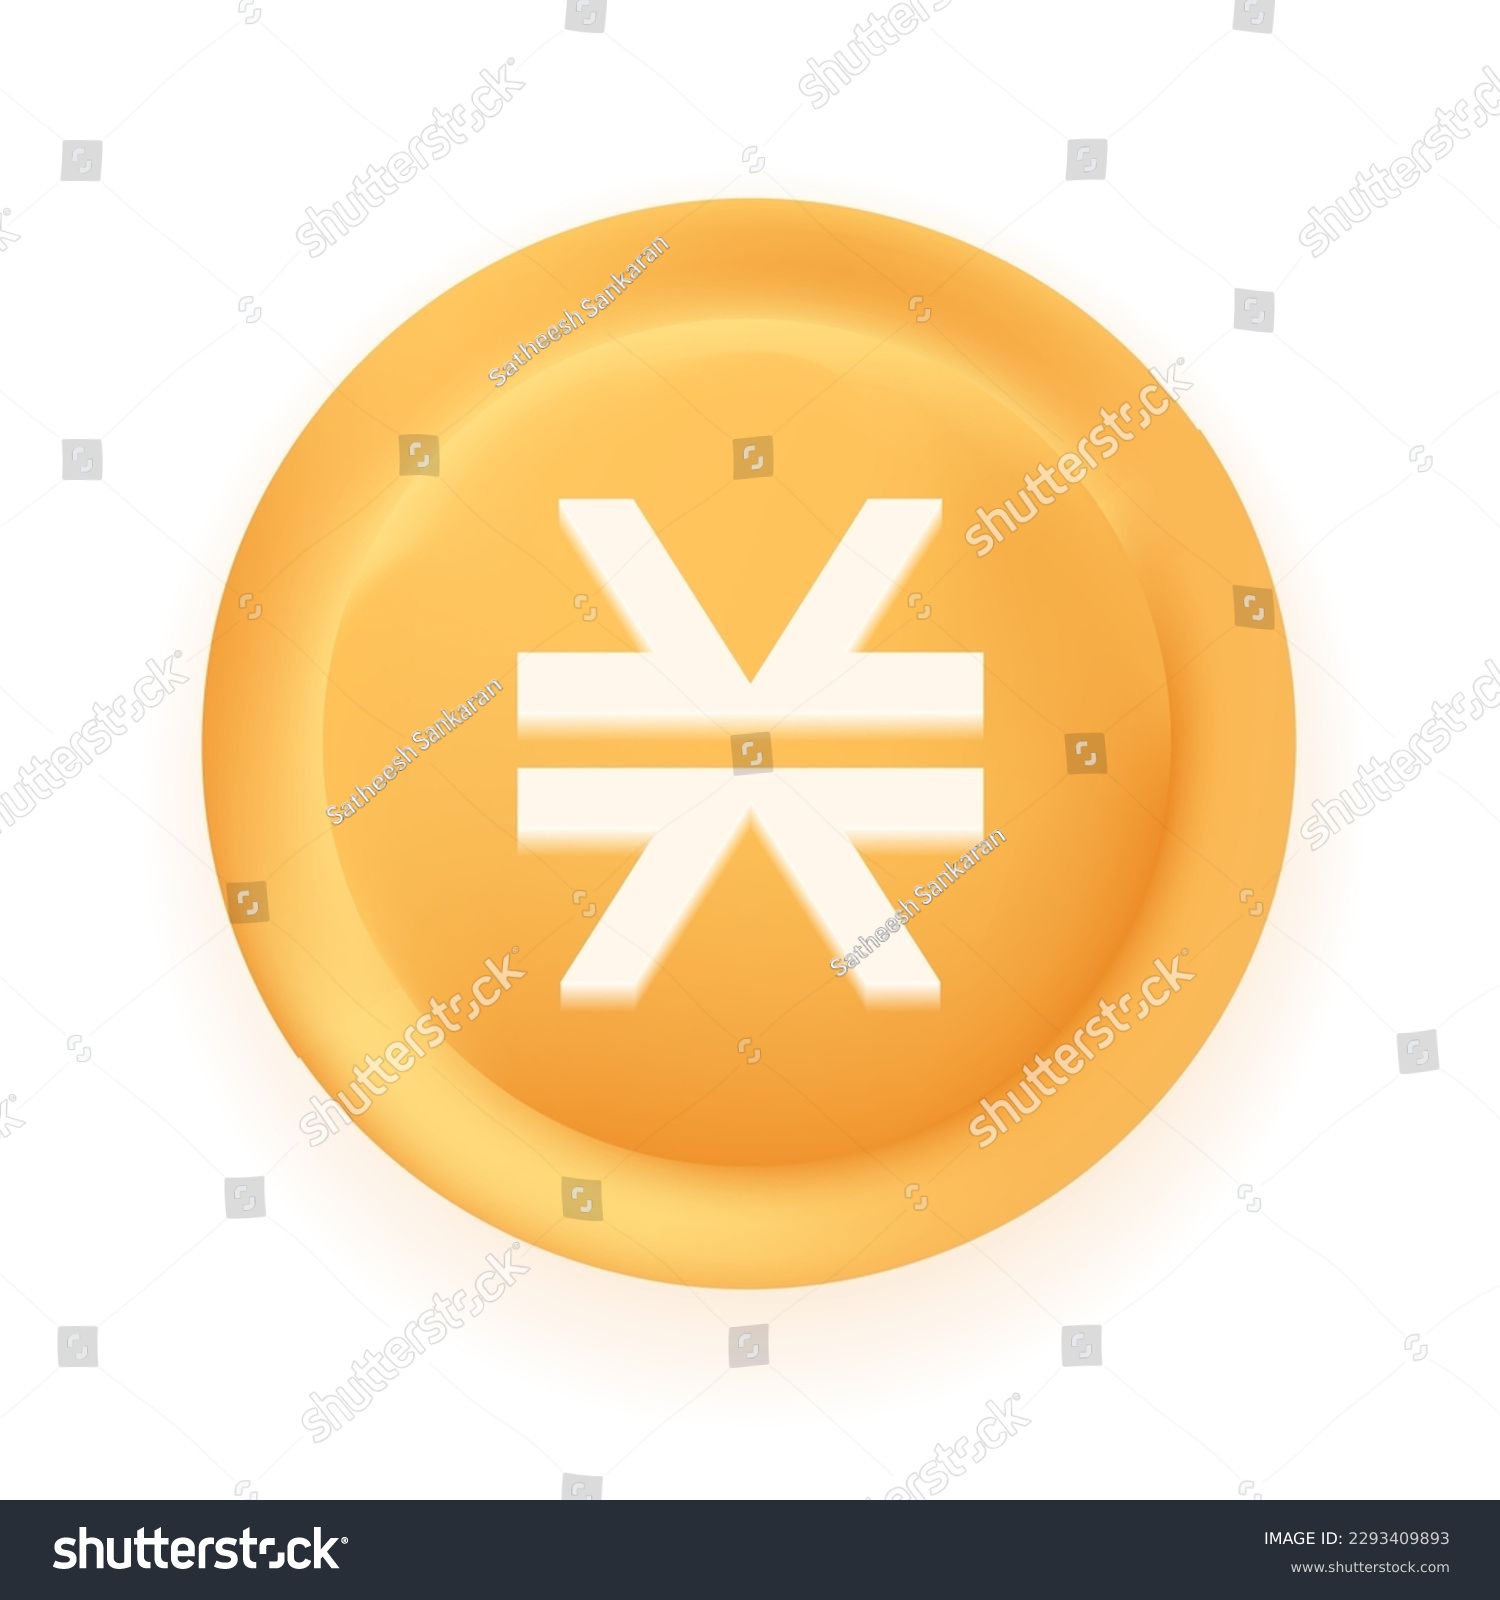 SVG of Stacks (STX) crypto currency 3D coin vector illustration isolated on white background. Can be used as virtual money icon, logo, emblem, sticker and badge designs. svg